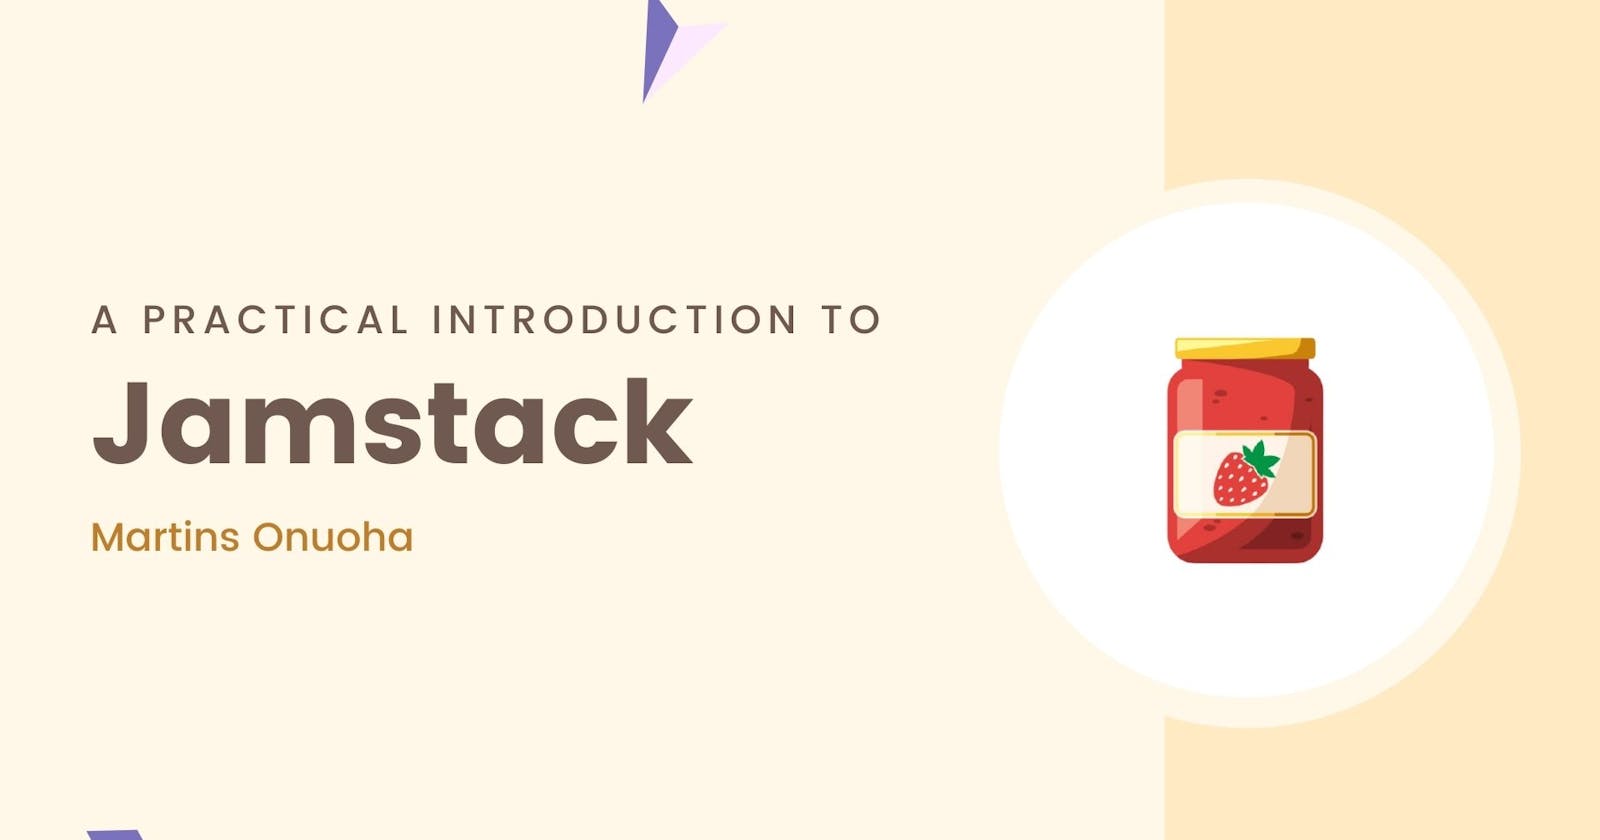 A Practical Introduction to Jamstack